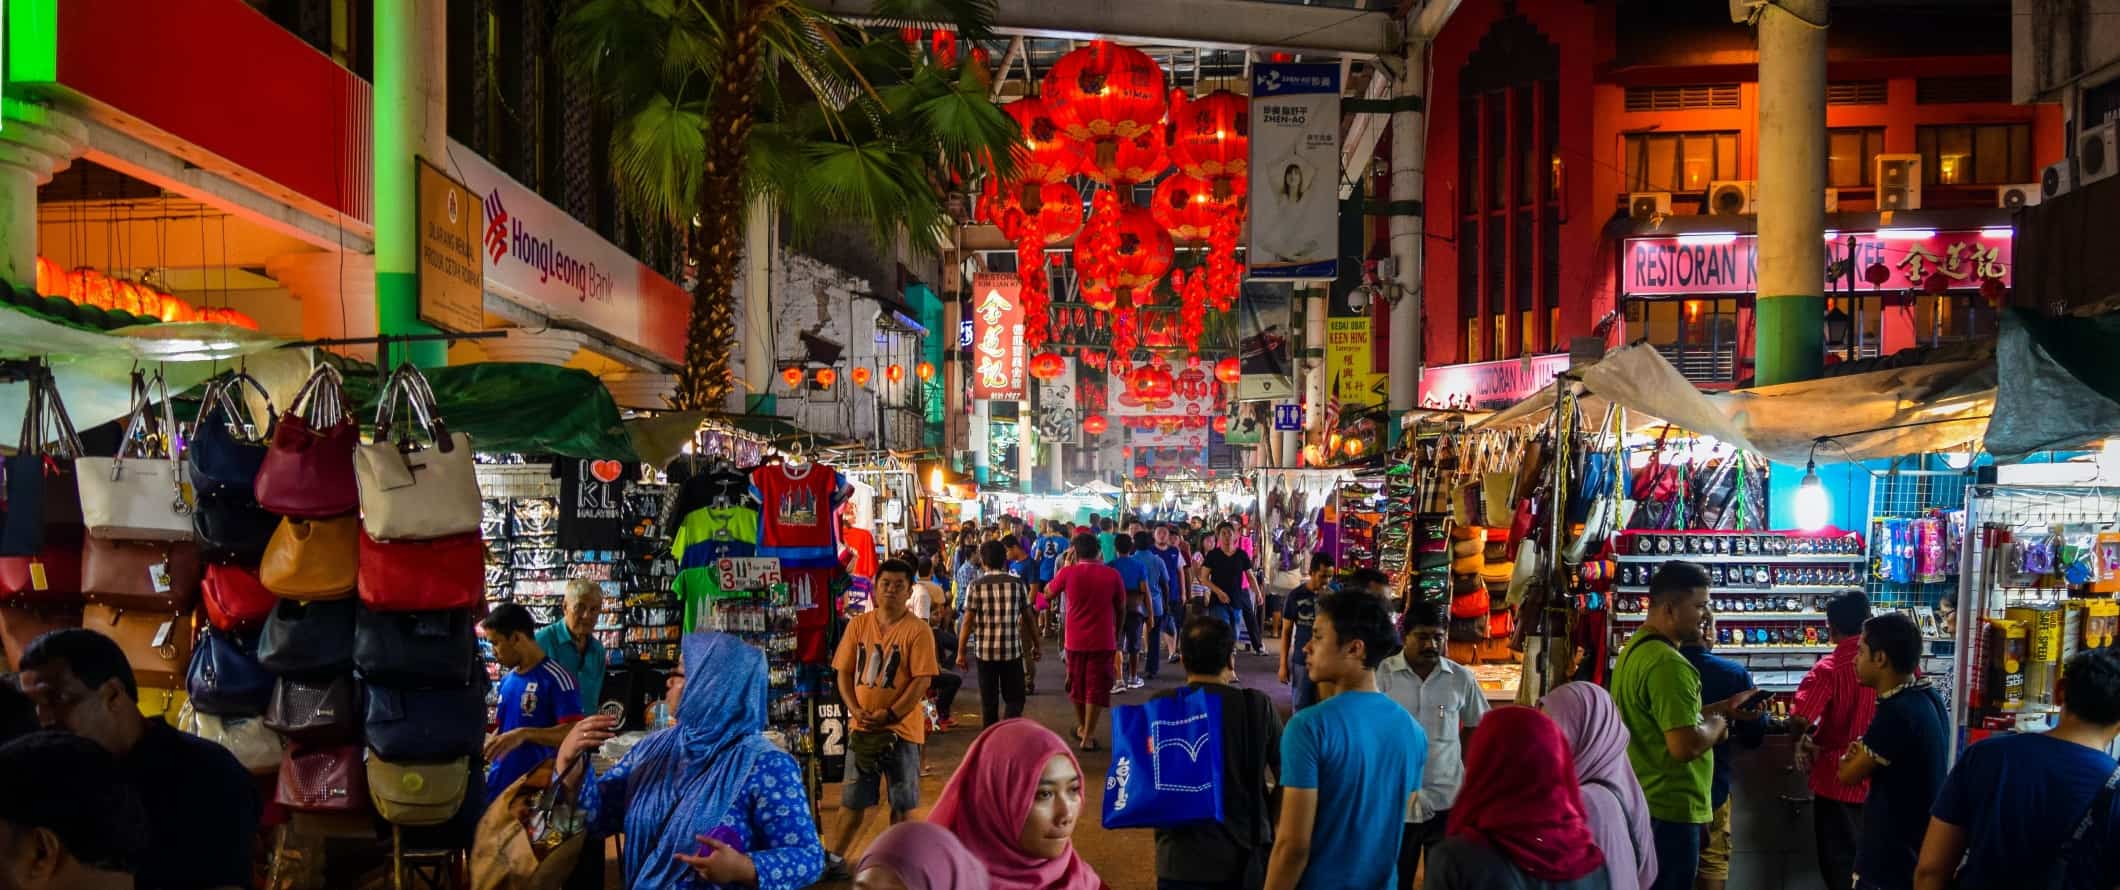 People walking down a crowded pedestrianized street lined with shops at night in Kuala Lumpur, Malaysia